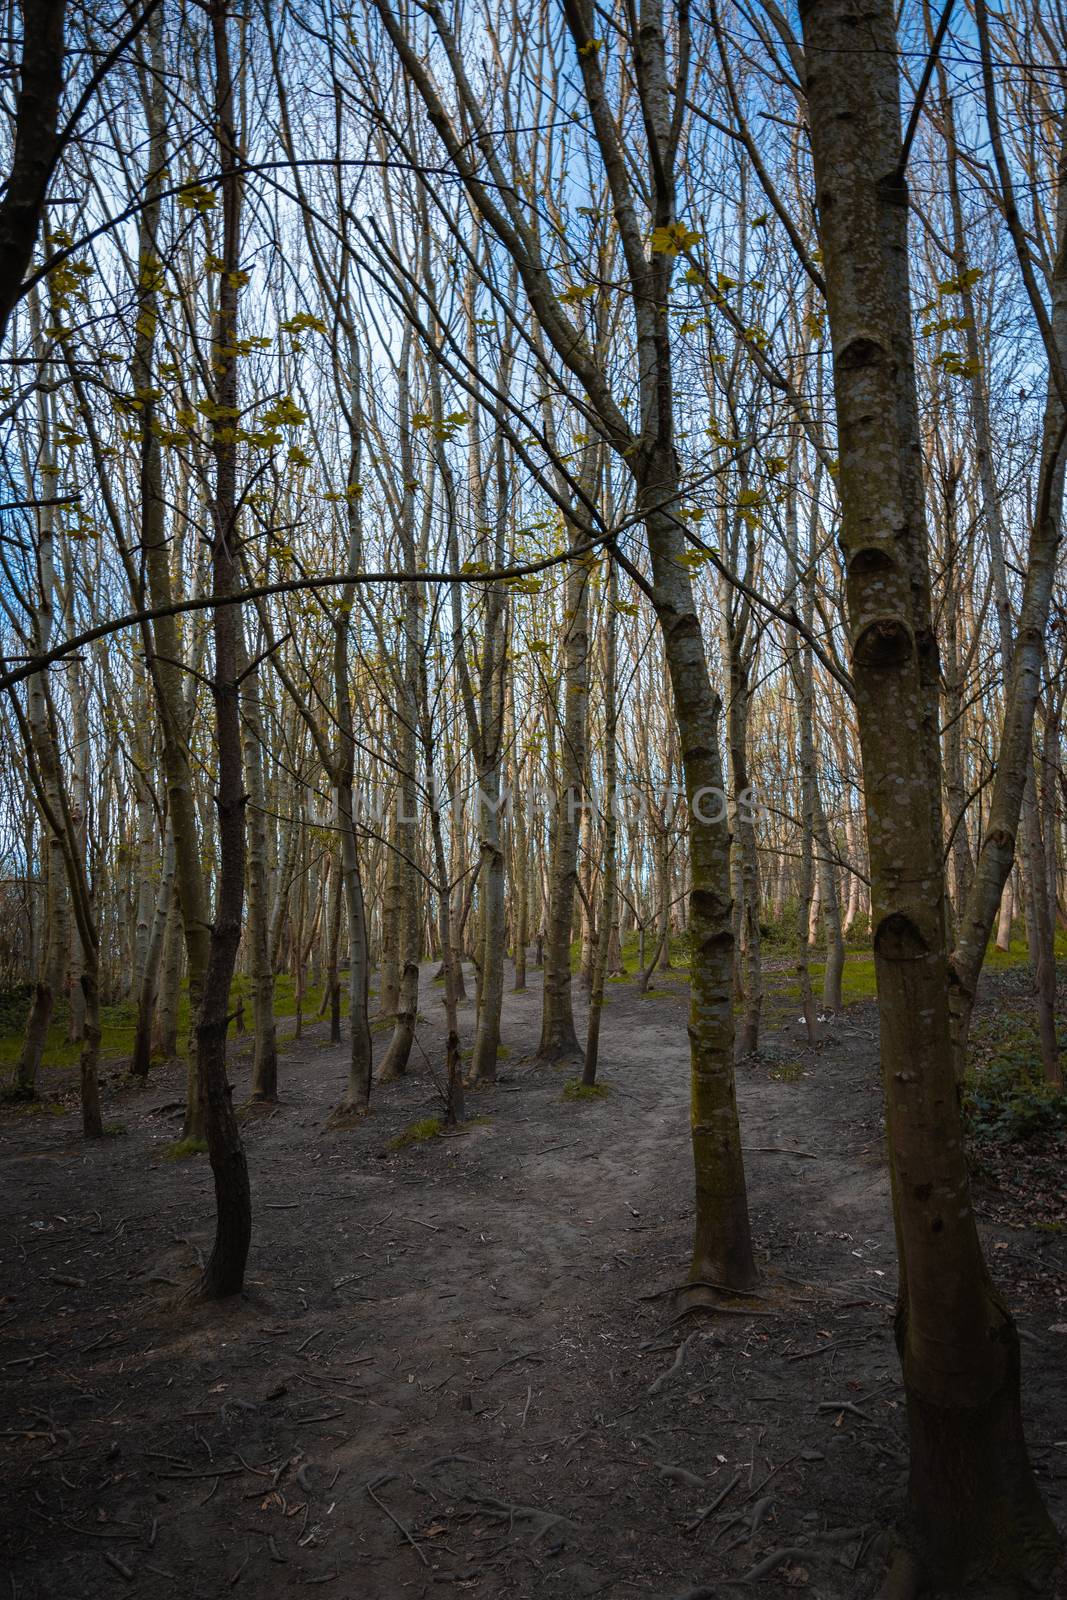 A dense woodland area with tall thin narrow trees and the sunlight shining between